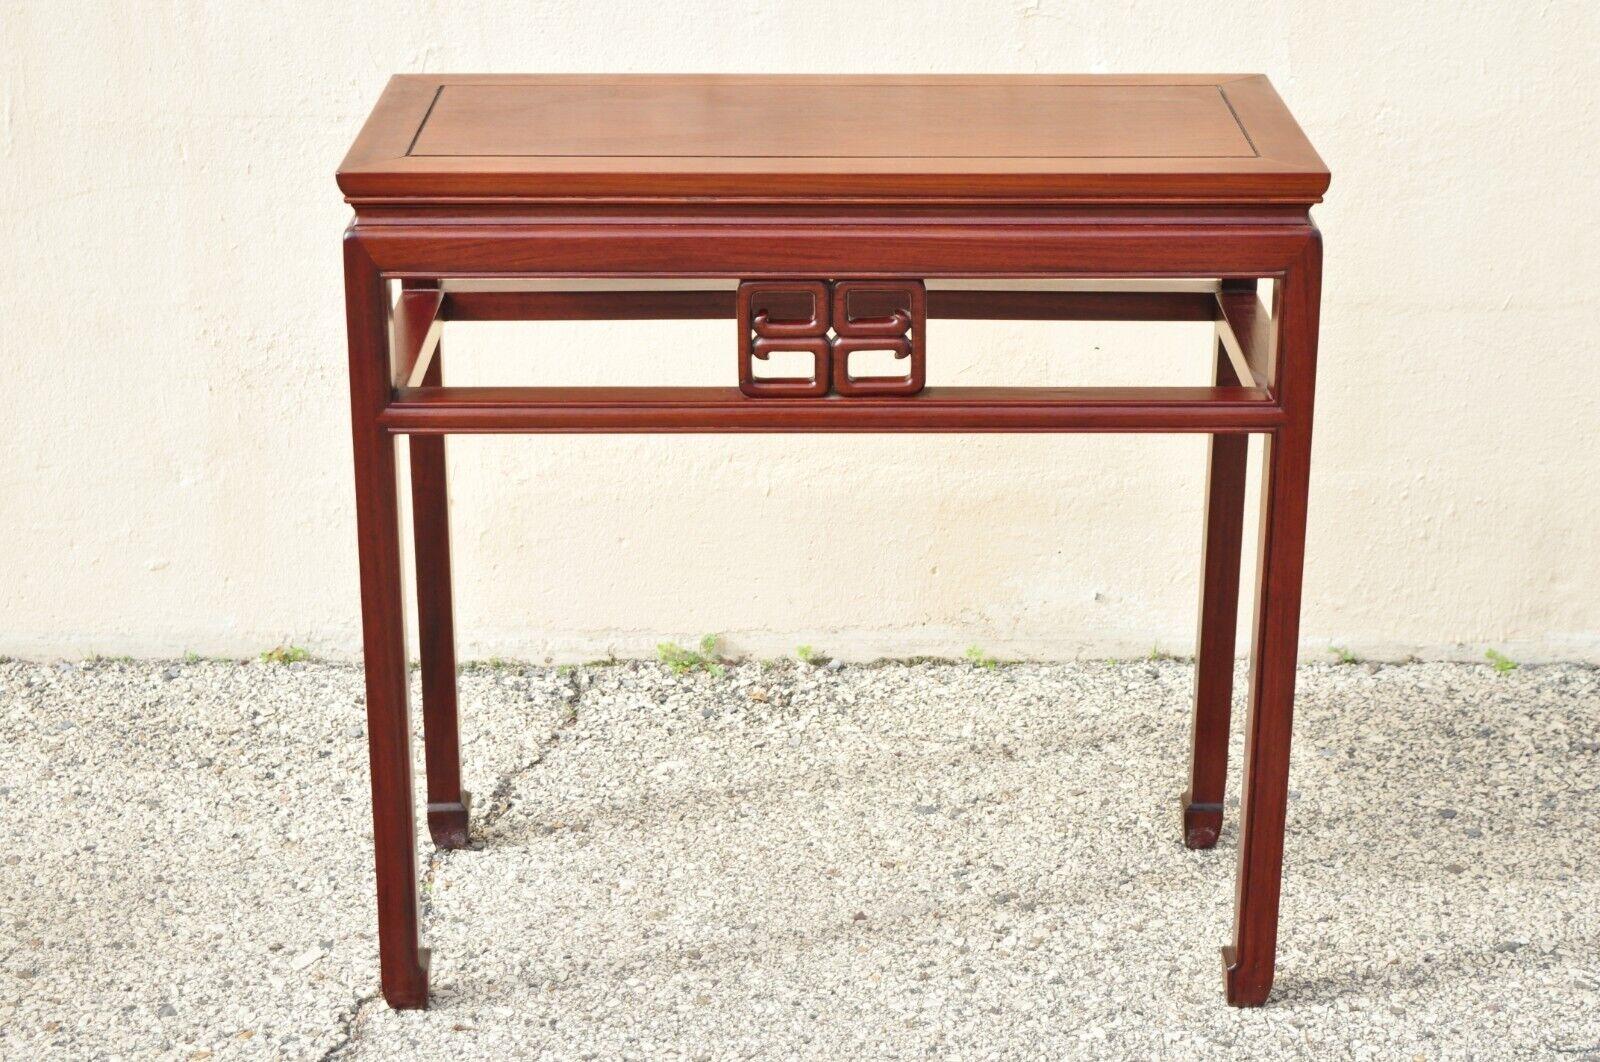 Vintage Oriental Chinese carved hardwood console side table with carved skirt. Item features carved fretwork skirt on both sides, carved hardwood frame, very nice vintage item, clean modernist lines, great style and form. Circa mid to late 20th